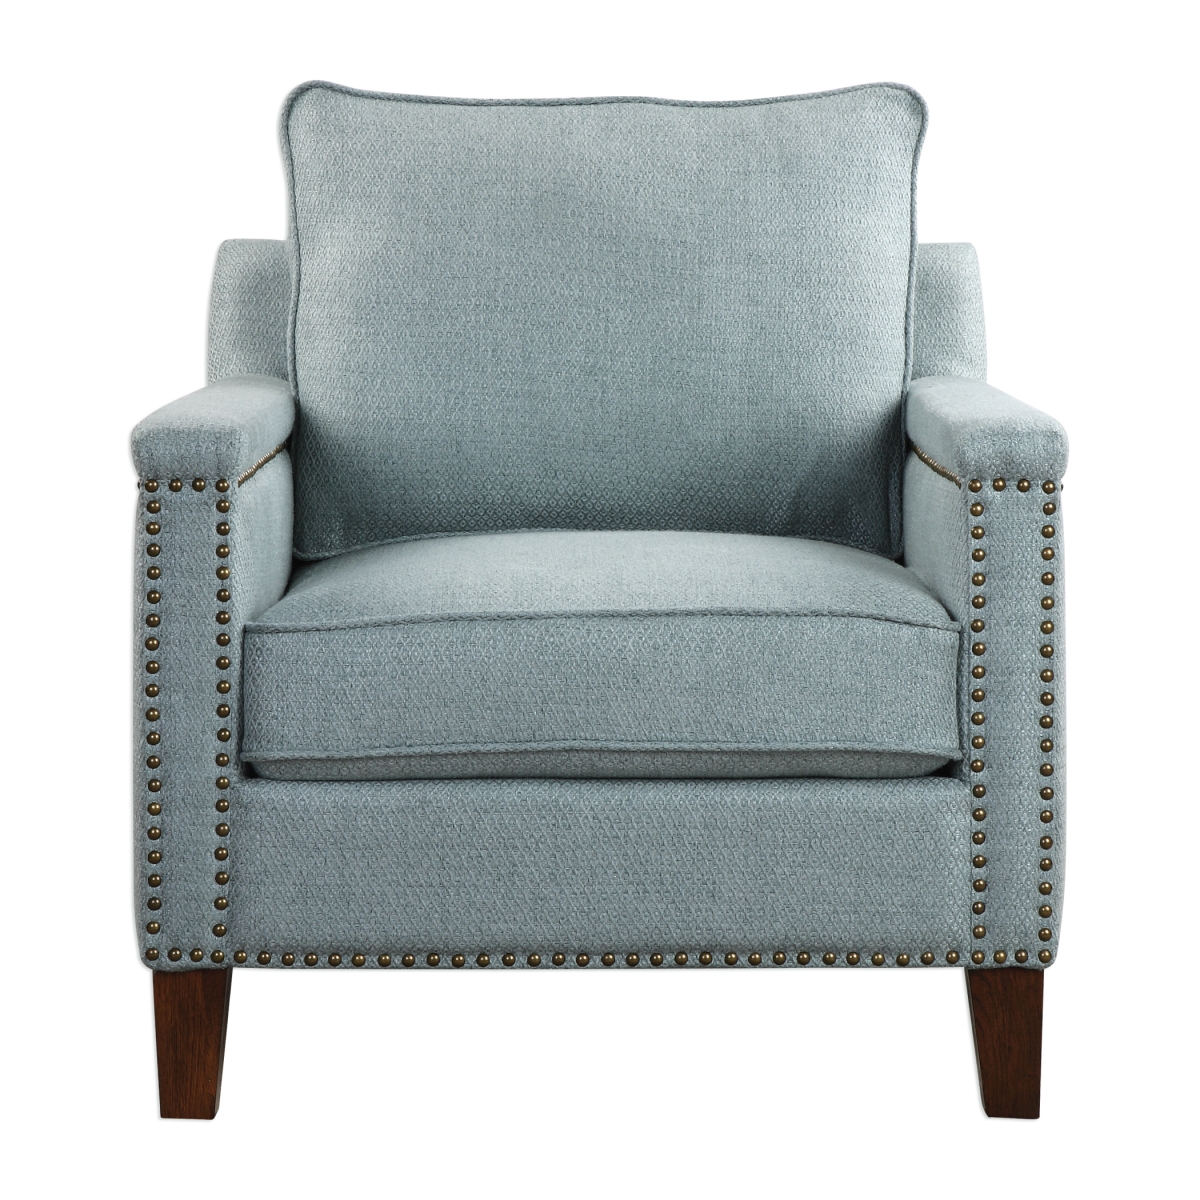 Picture of 212 Main 23381 Charlotta Sea Mist Accent Chair